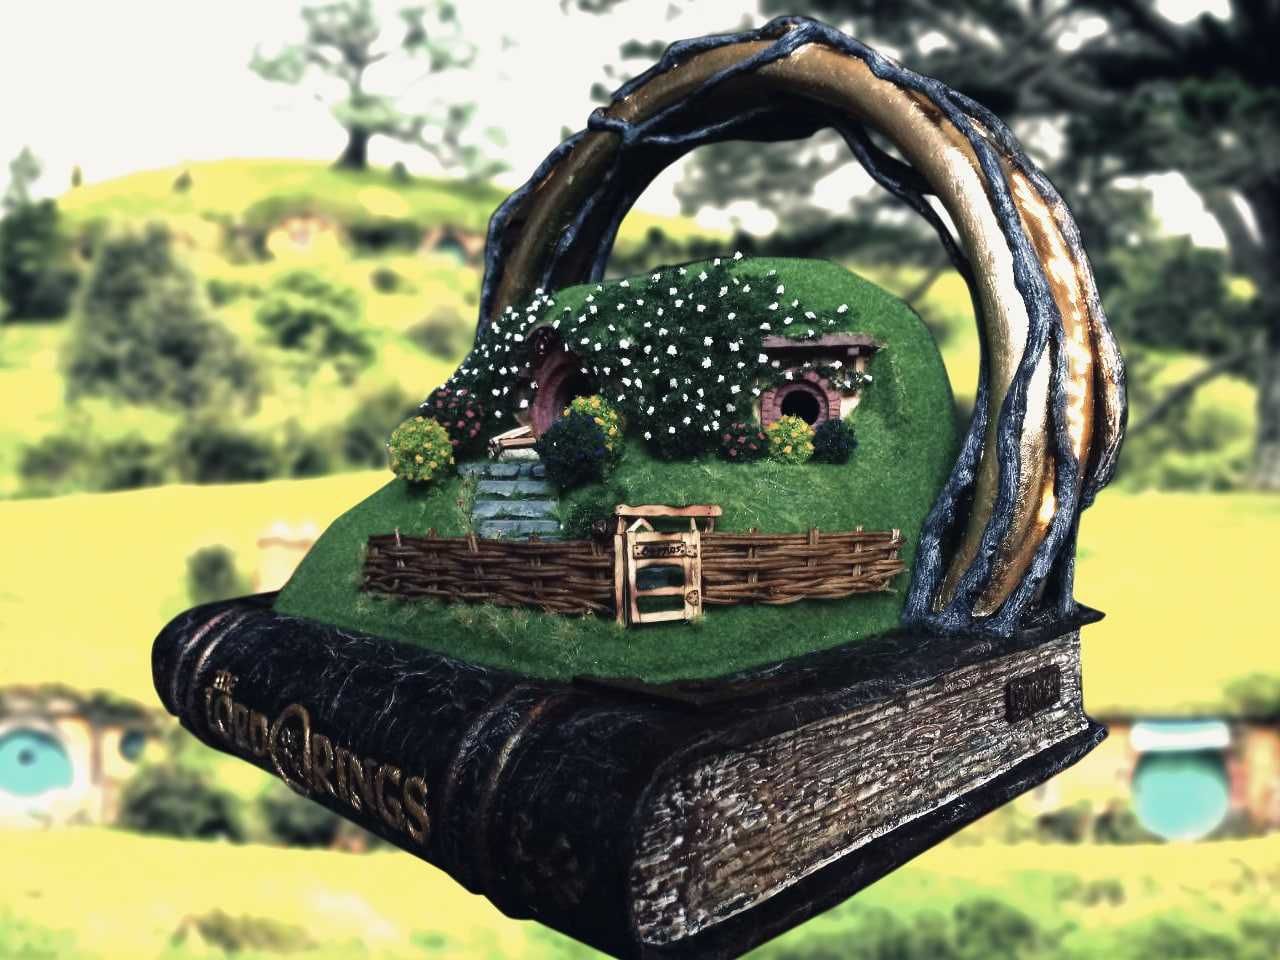 Lord Of The Rings [Bilbo Beggins Home]